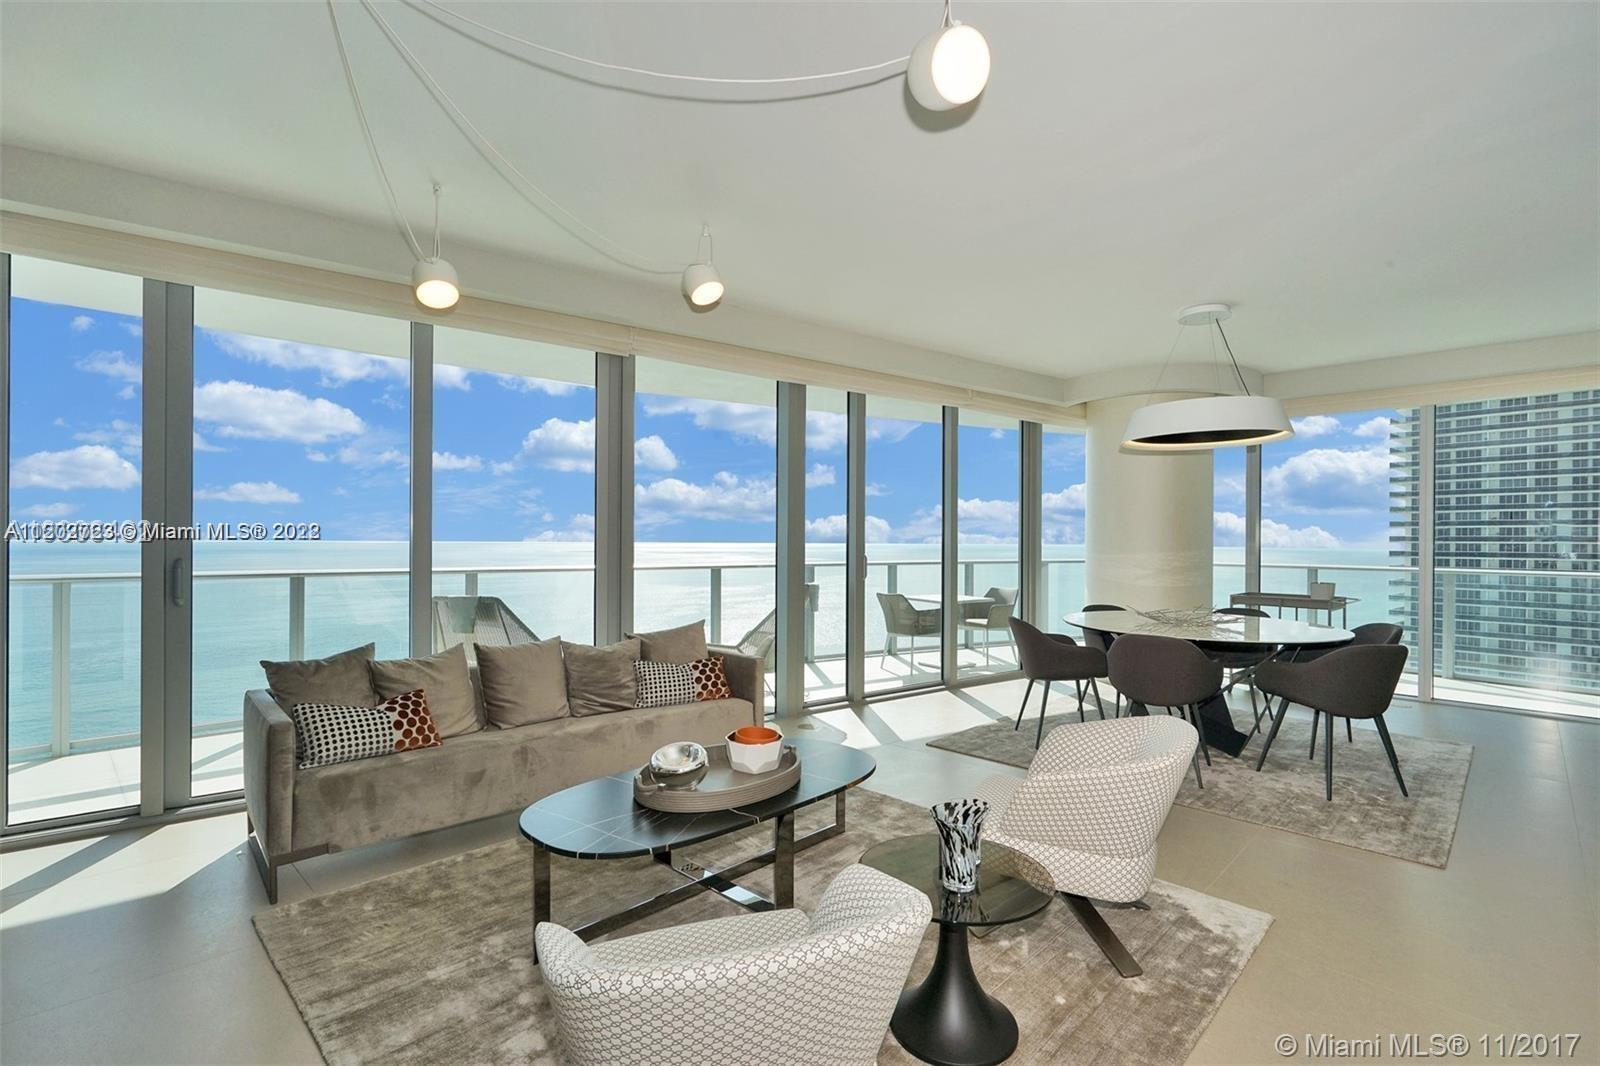 Best view of South Florida! 4 bedroom/4.5 bath at Hyde! This is a RESIDENTIAL UNIT, meaning you can 